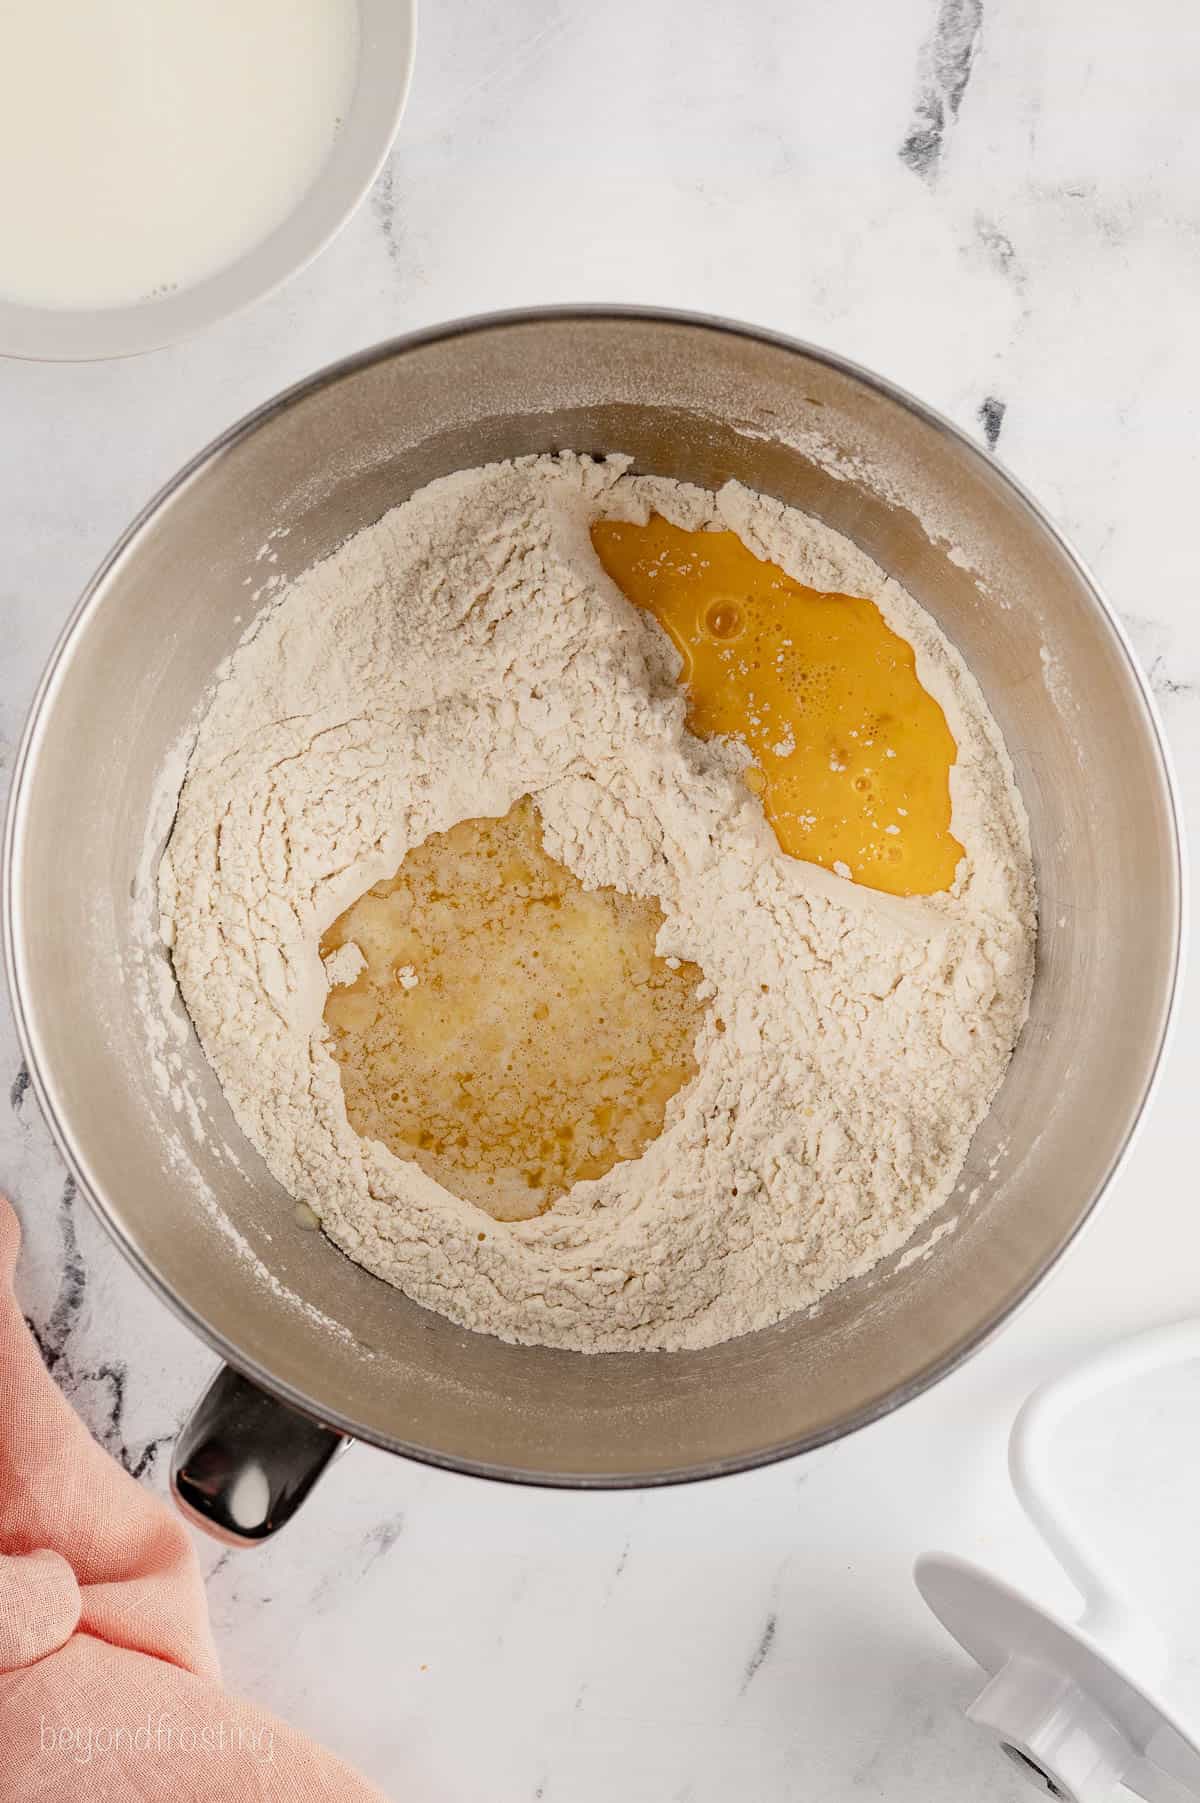 Melted butter and a beaten egg are added to a mixing bowl of dry ingredients.